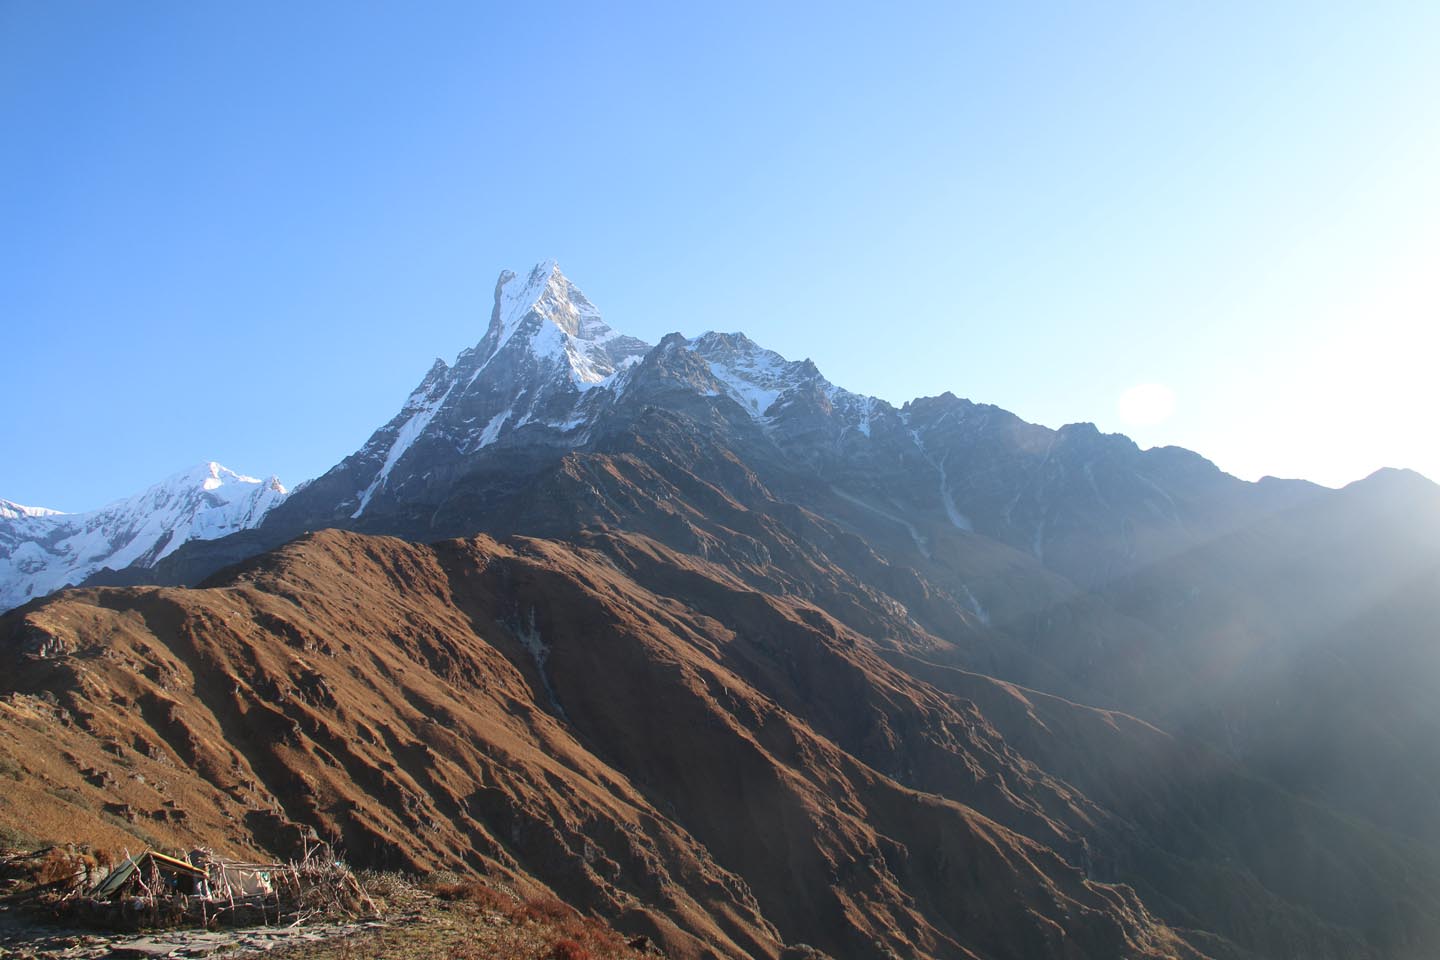 The majestic view of Mardi himal from the Upper View Point.